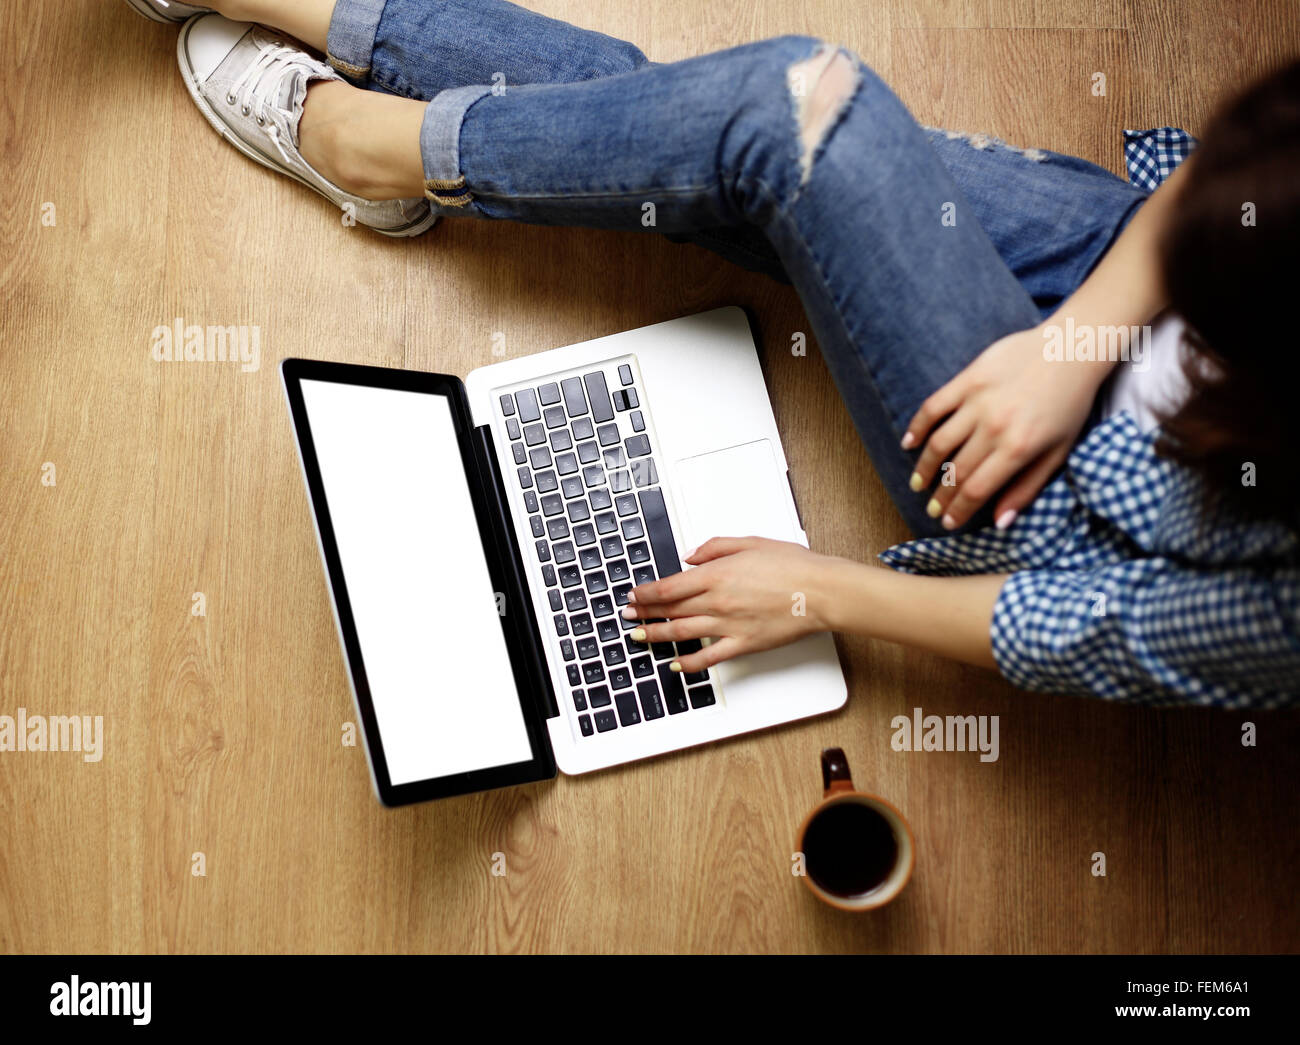 Laptop in girls hands typing and sitting on a wooden floor Stock Photo ...